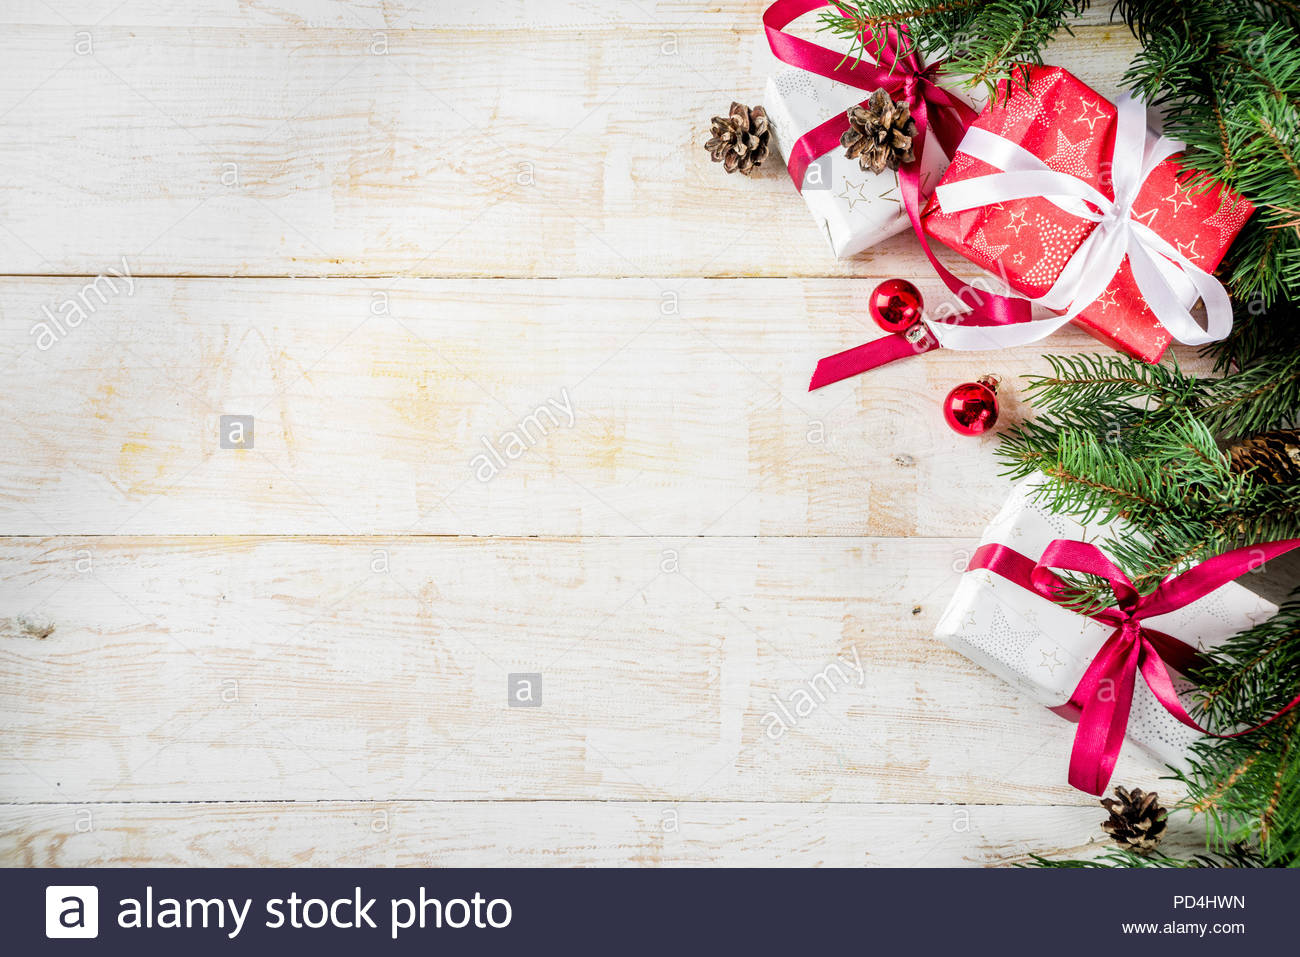 Christmas background with Christmas present gifts box and